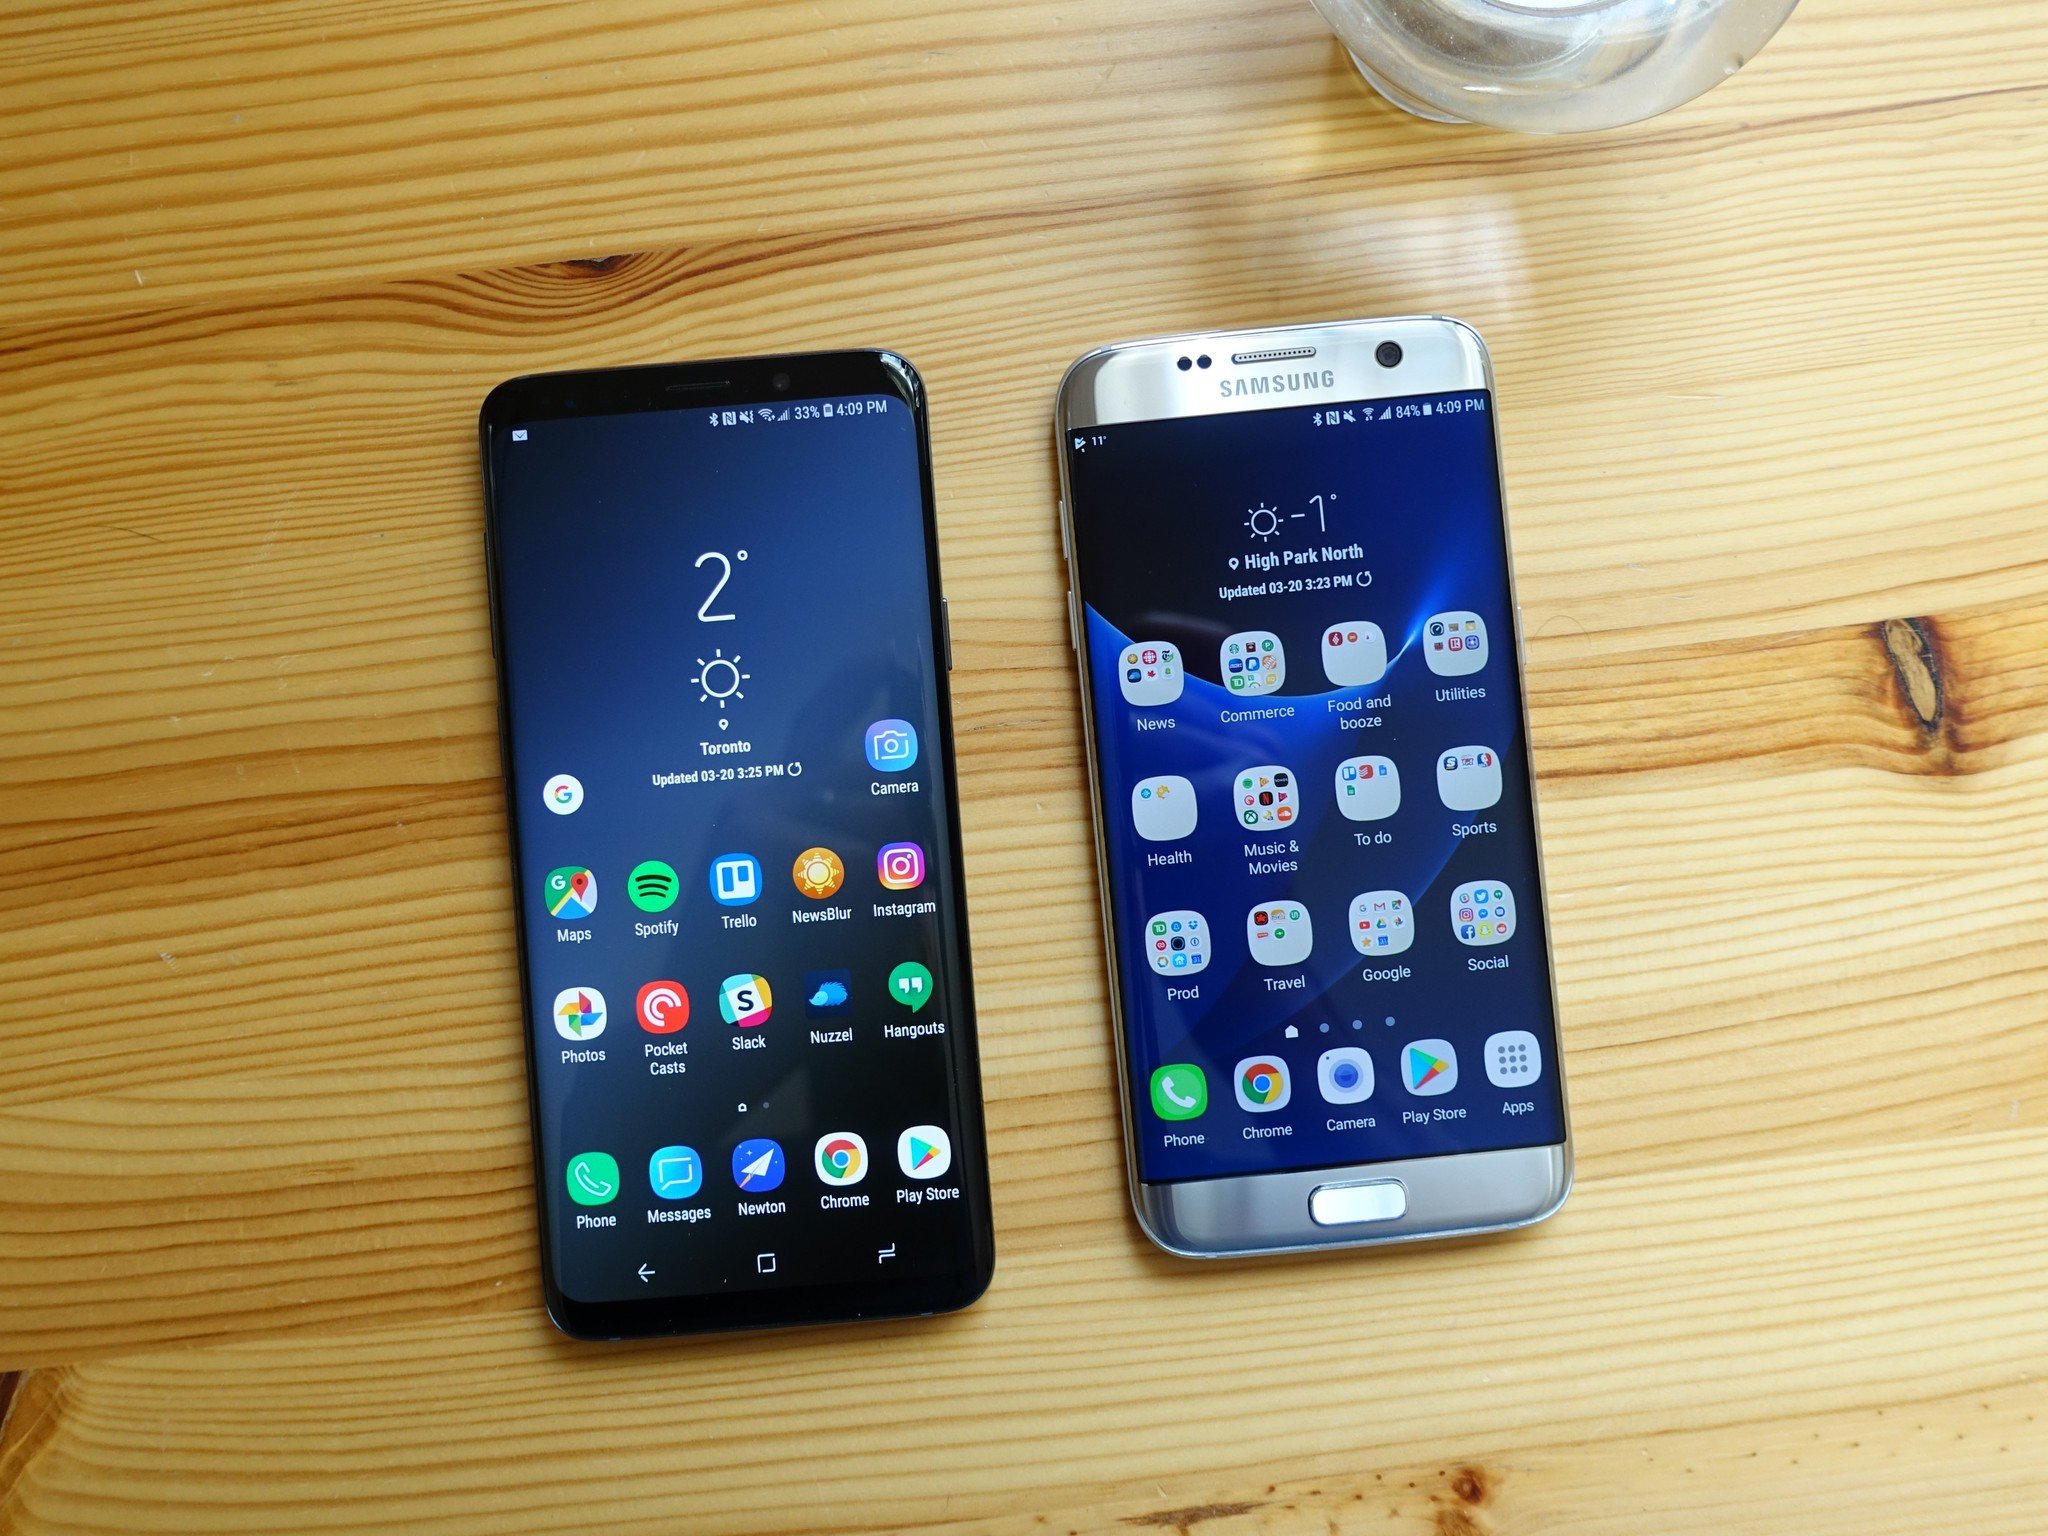 Samsung Galaxy S9+ vs. Galaxy S7 edge: Should Android Central